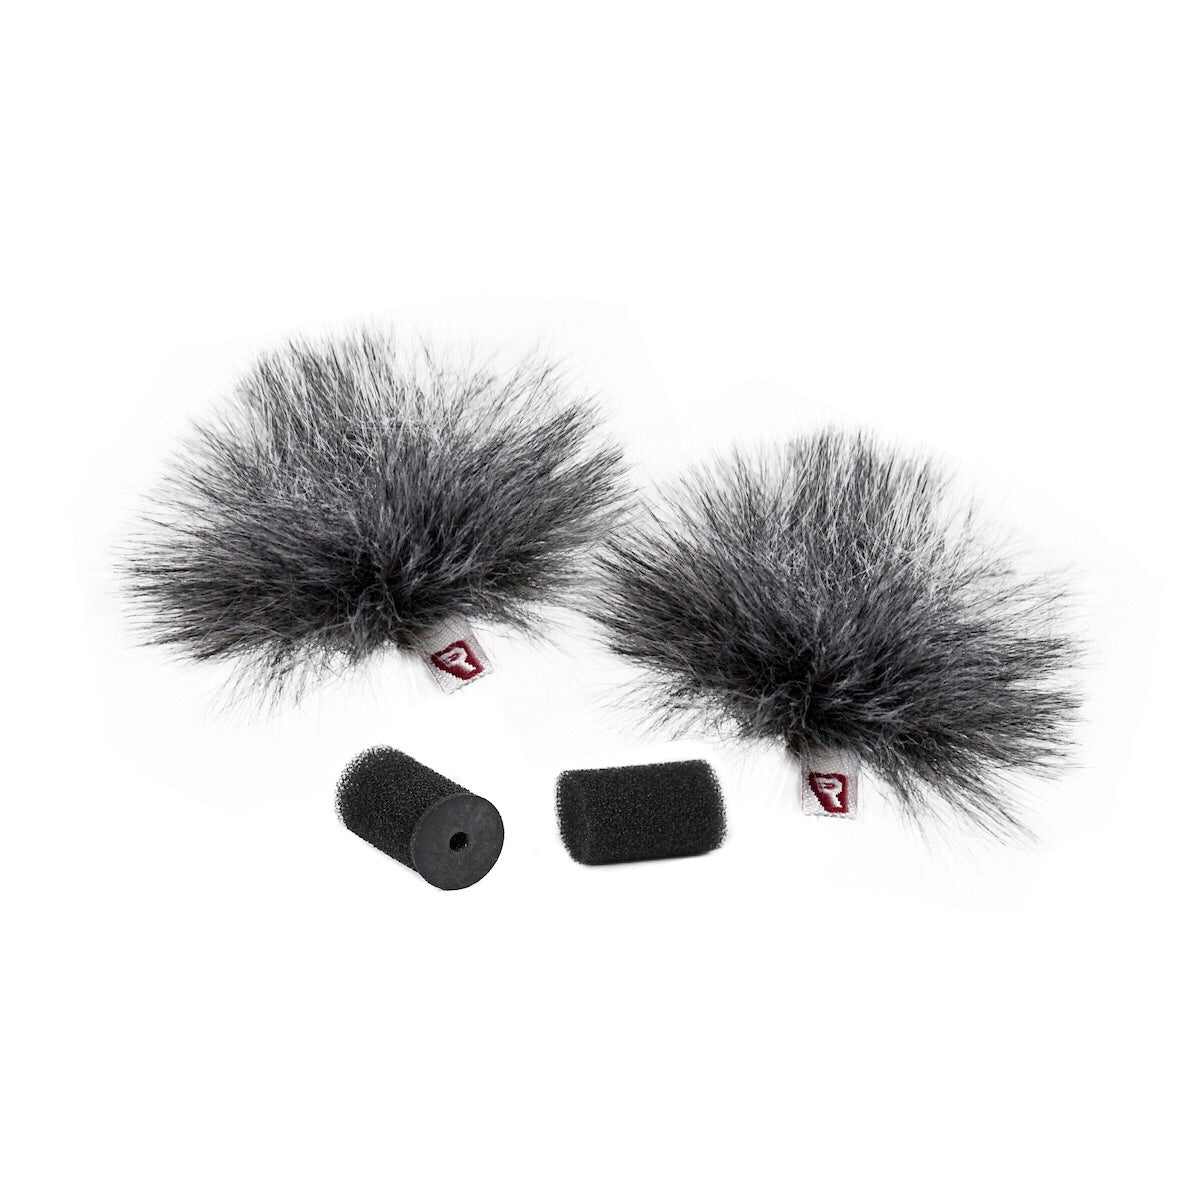 Rycote Grey Ristretto Lavalier Windjammer, Pair, Synthetic Fur